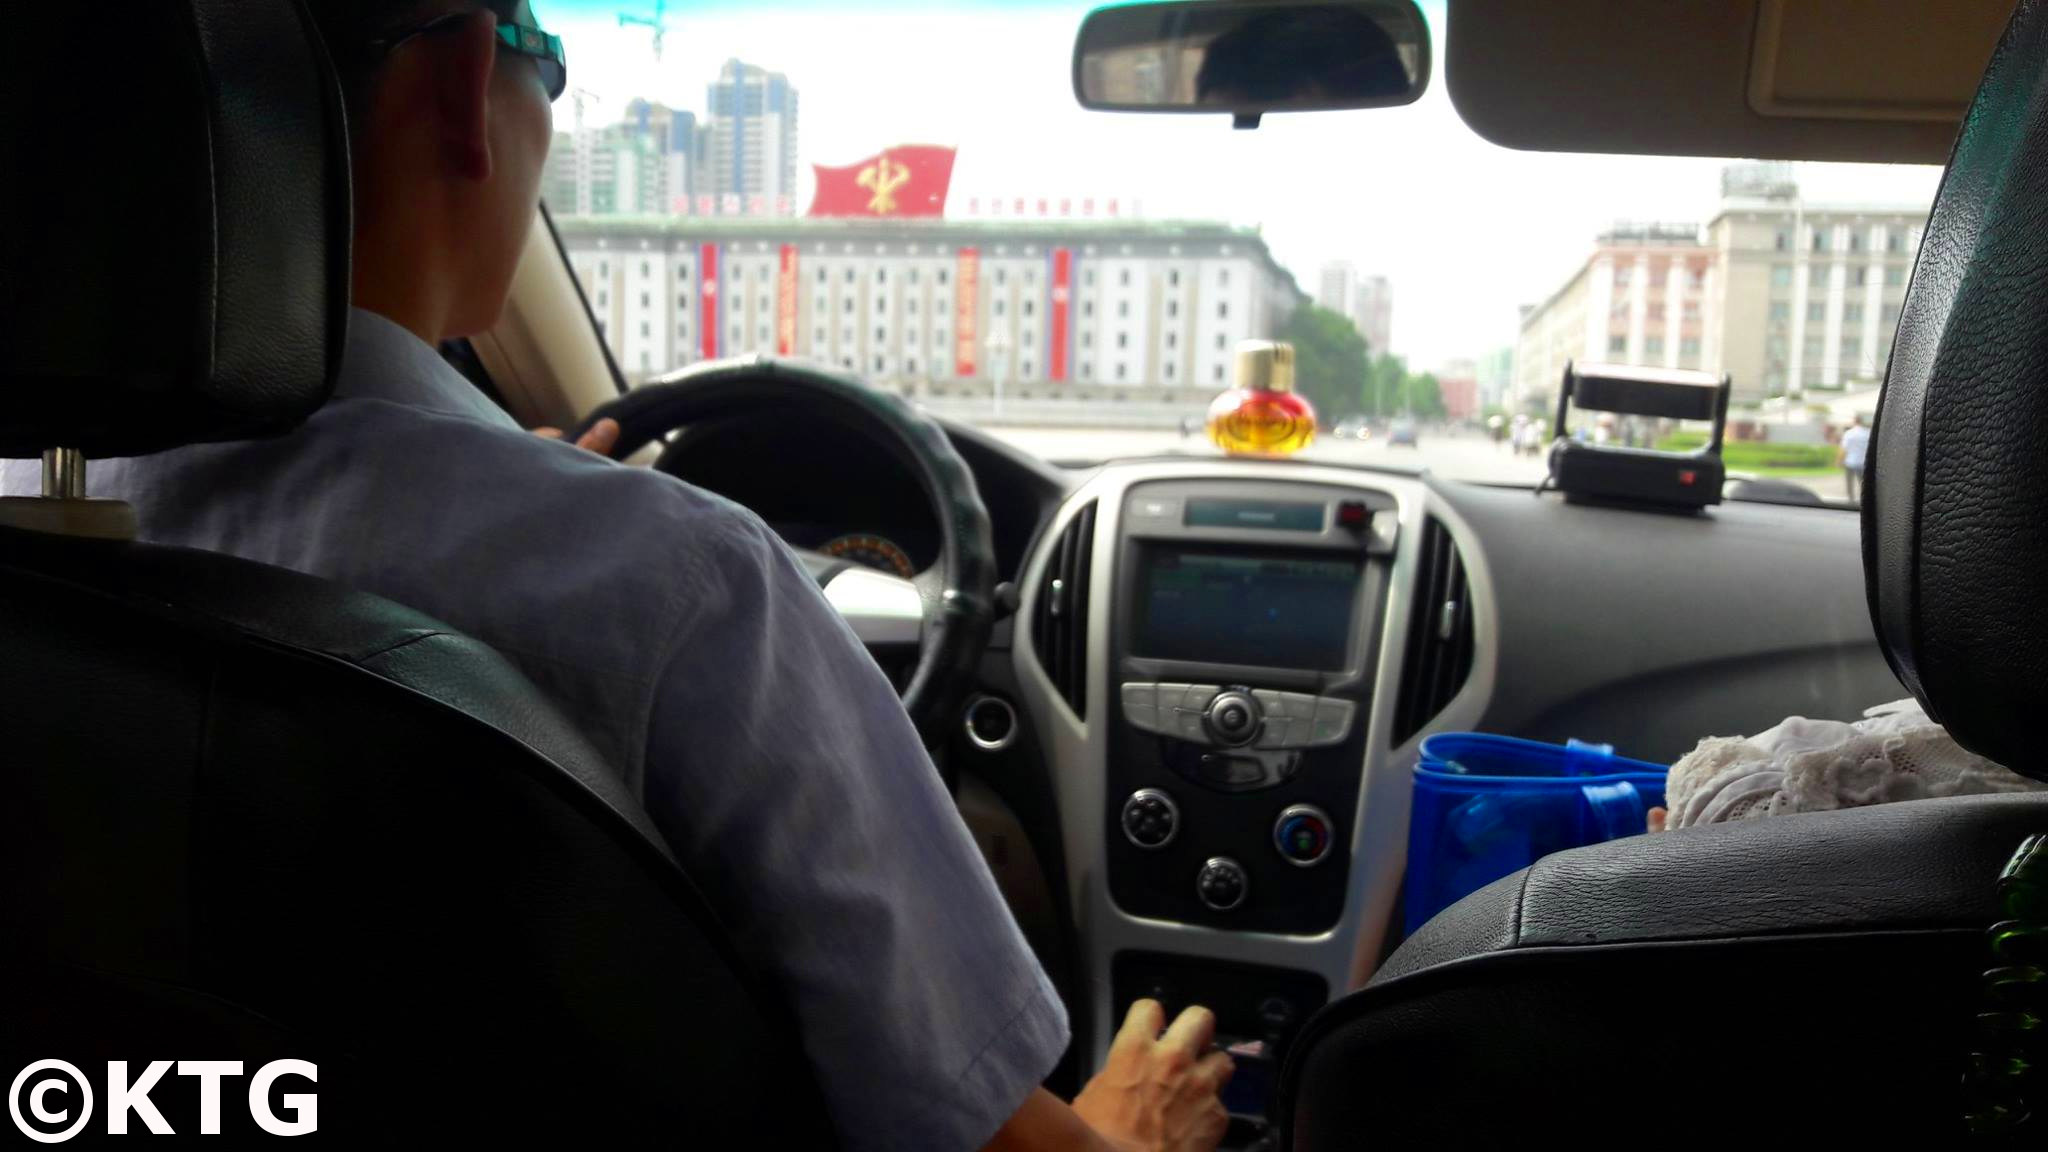 Taking an Air Koryo taxi through Kim Il Sung square in Pyongyang capital city of North Korea, DPRK, with KTG Tours